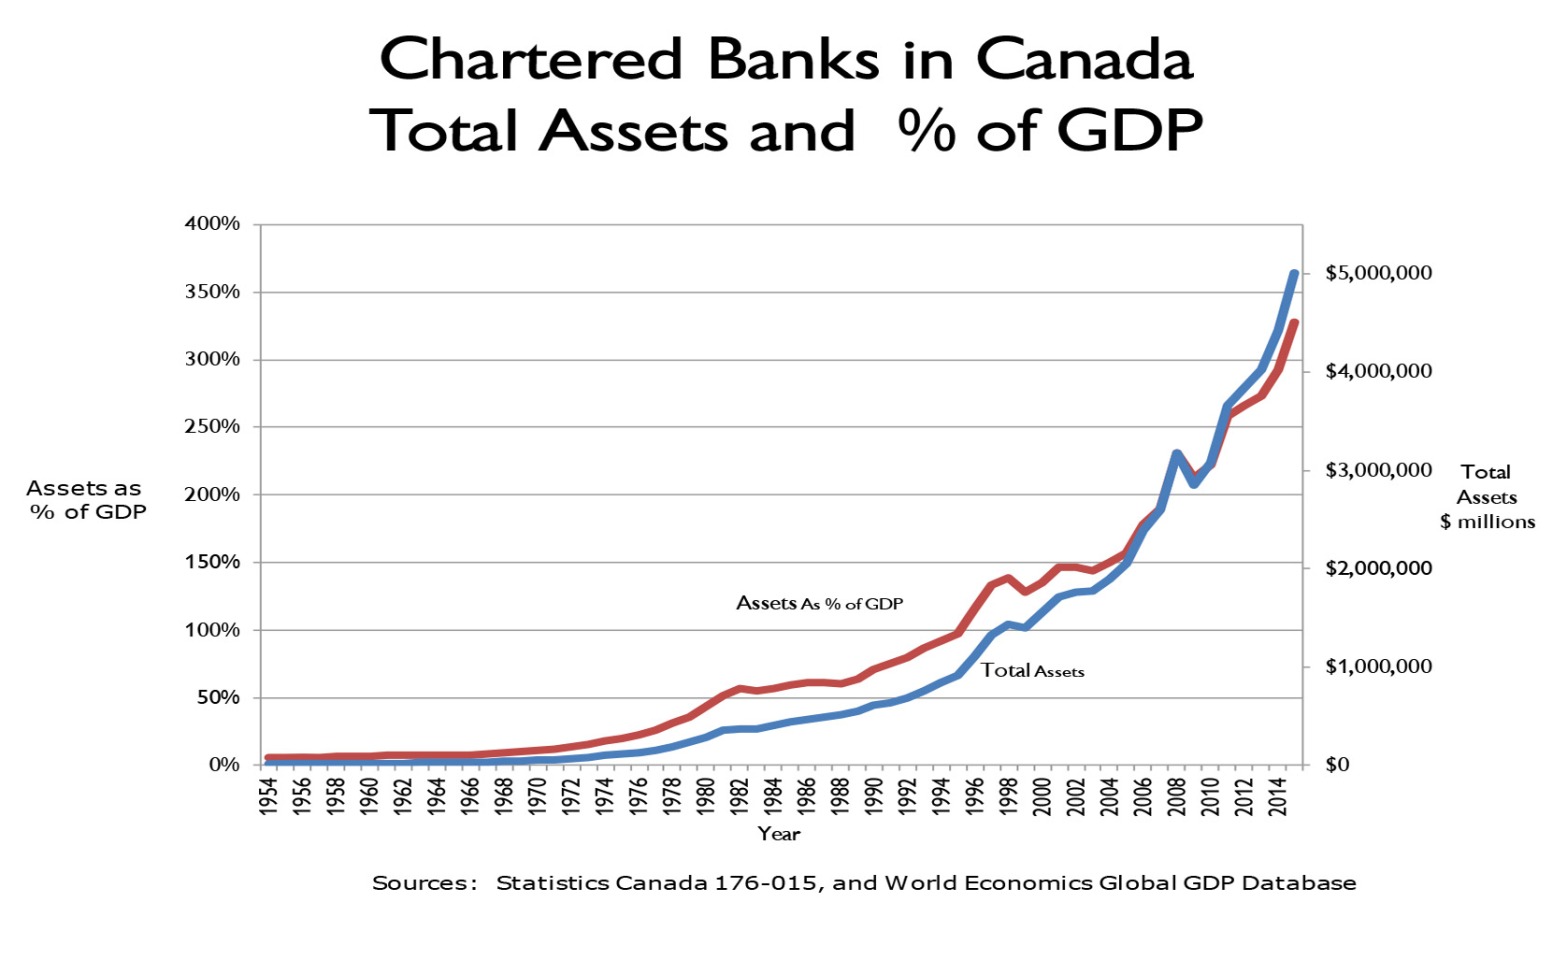 Bank assets as a % of GDP